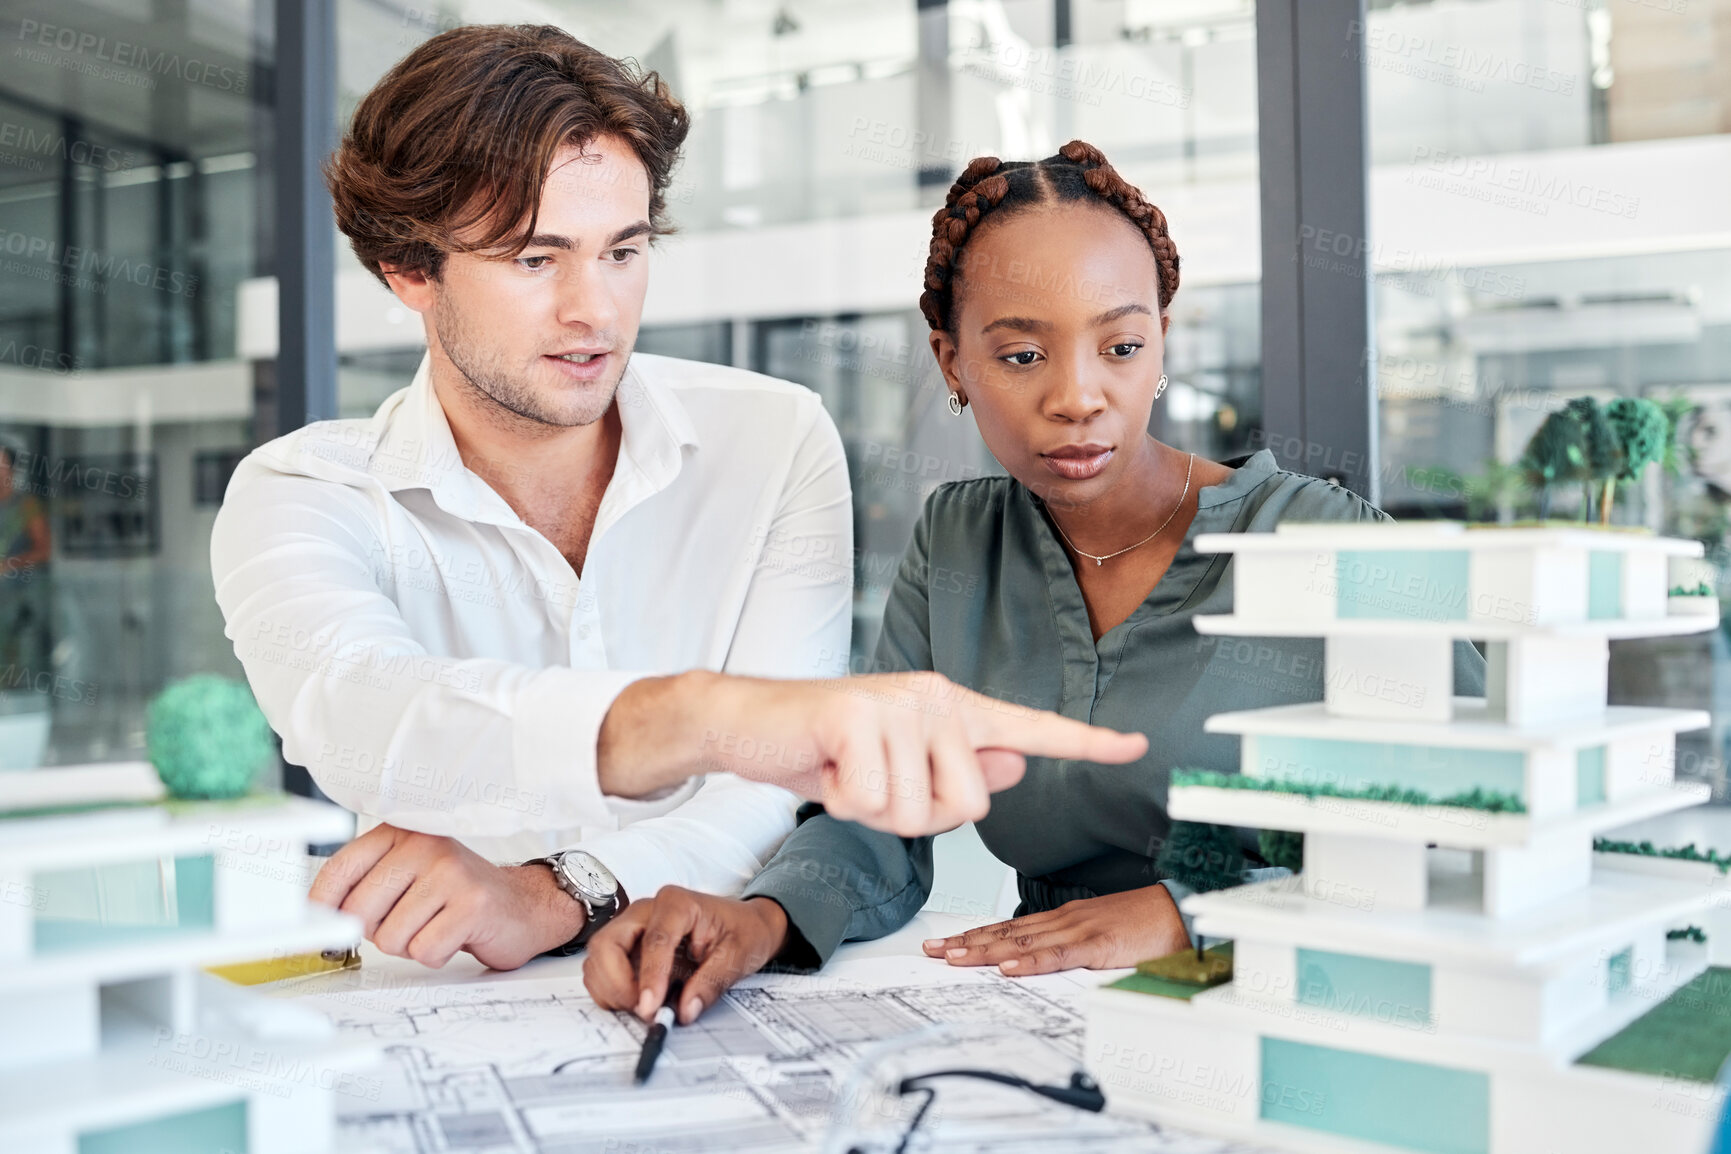 Buy stock photo Architecture, man and woman with building model, discussion or talk for planning construction or collaboration project. Engineer, architect or teamwork for blueprint design, brainstorming or creative